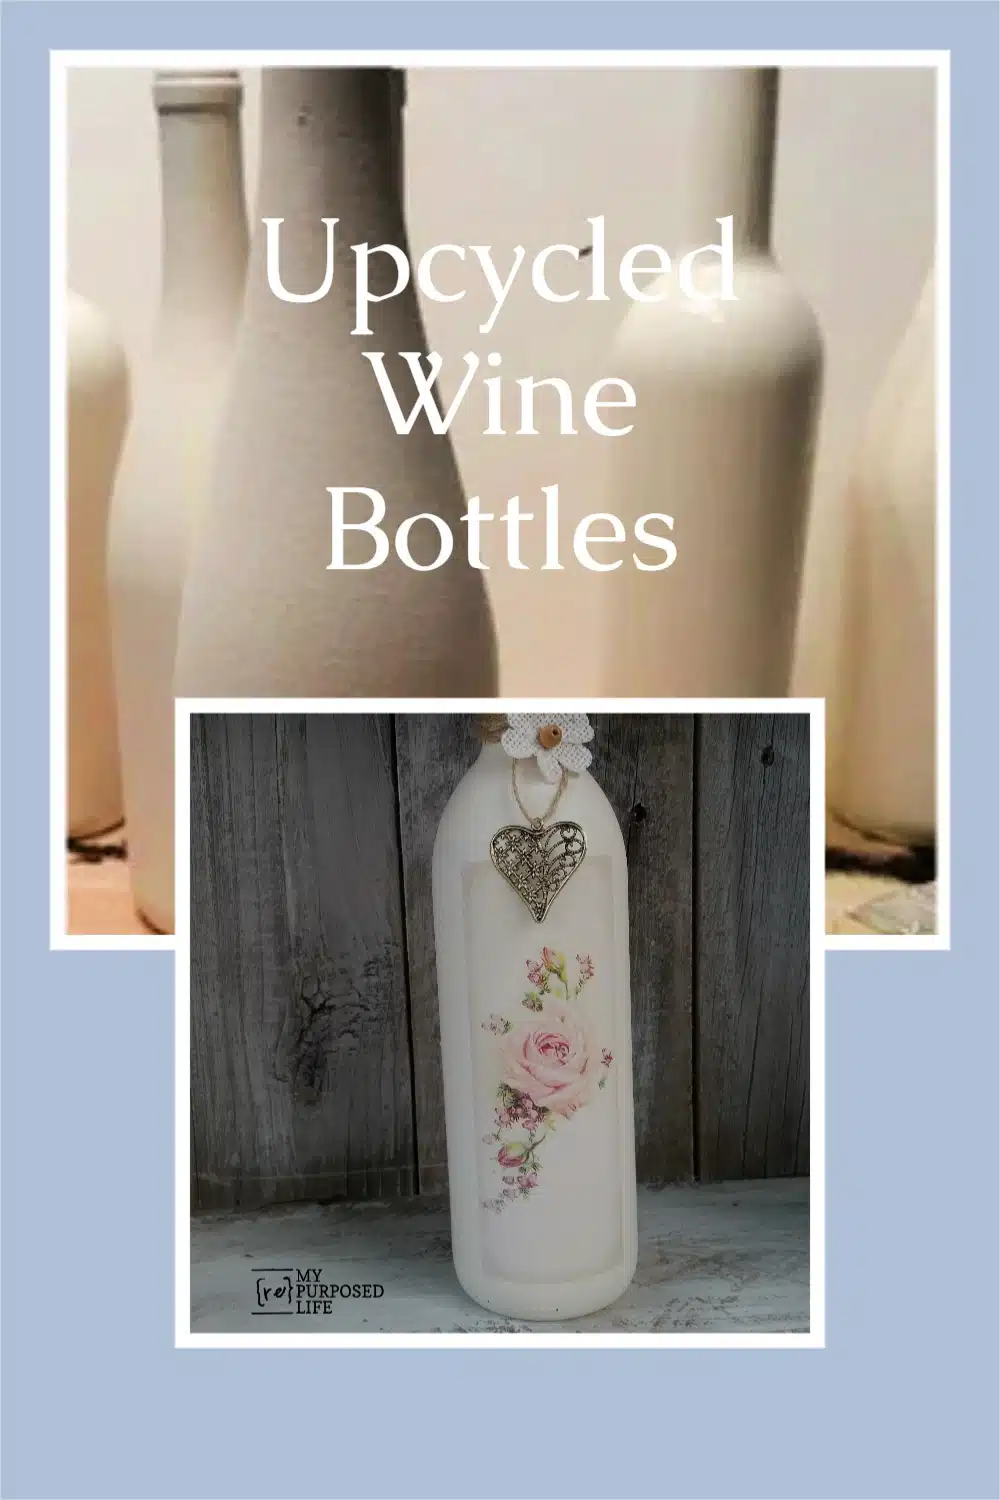 Repurpose some old wine bottles with some paint and an image transfer using a gel transfer medium. Great gift idea for the wine lover in your family. #MyRepurposedLife #repurposed #winebottle #imagetransfer #glassware via @repurposedlife